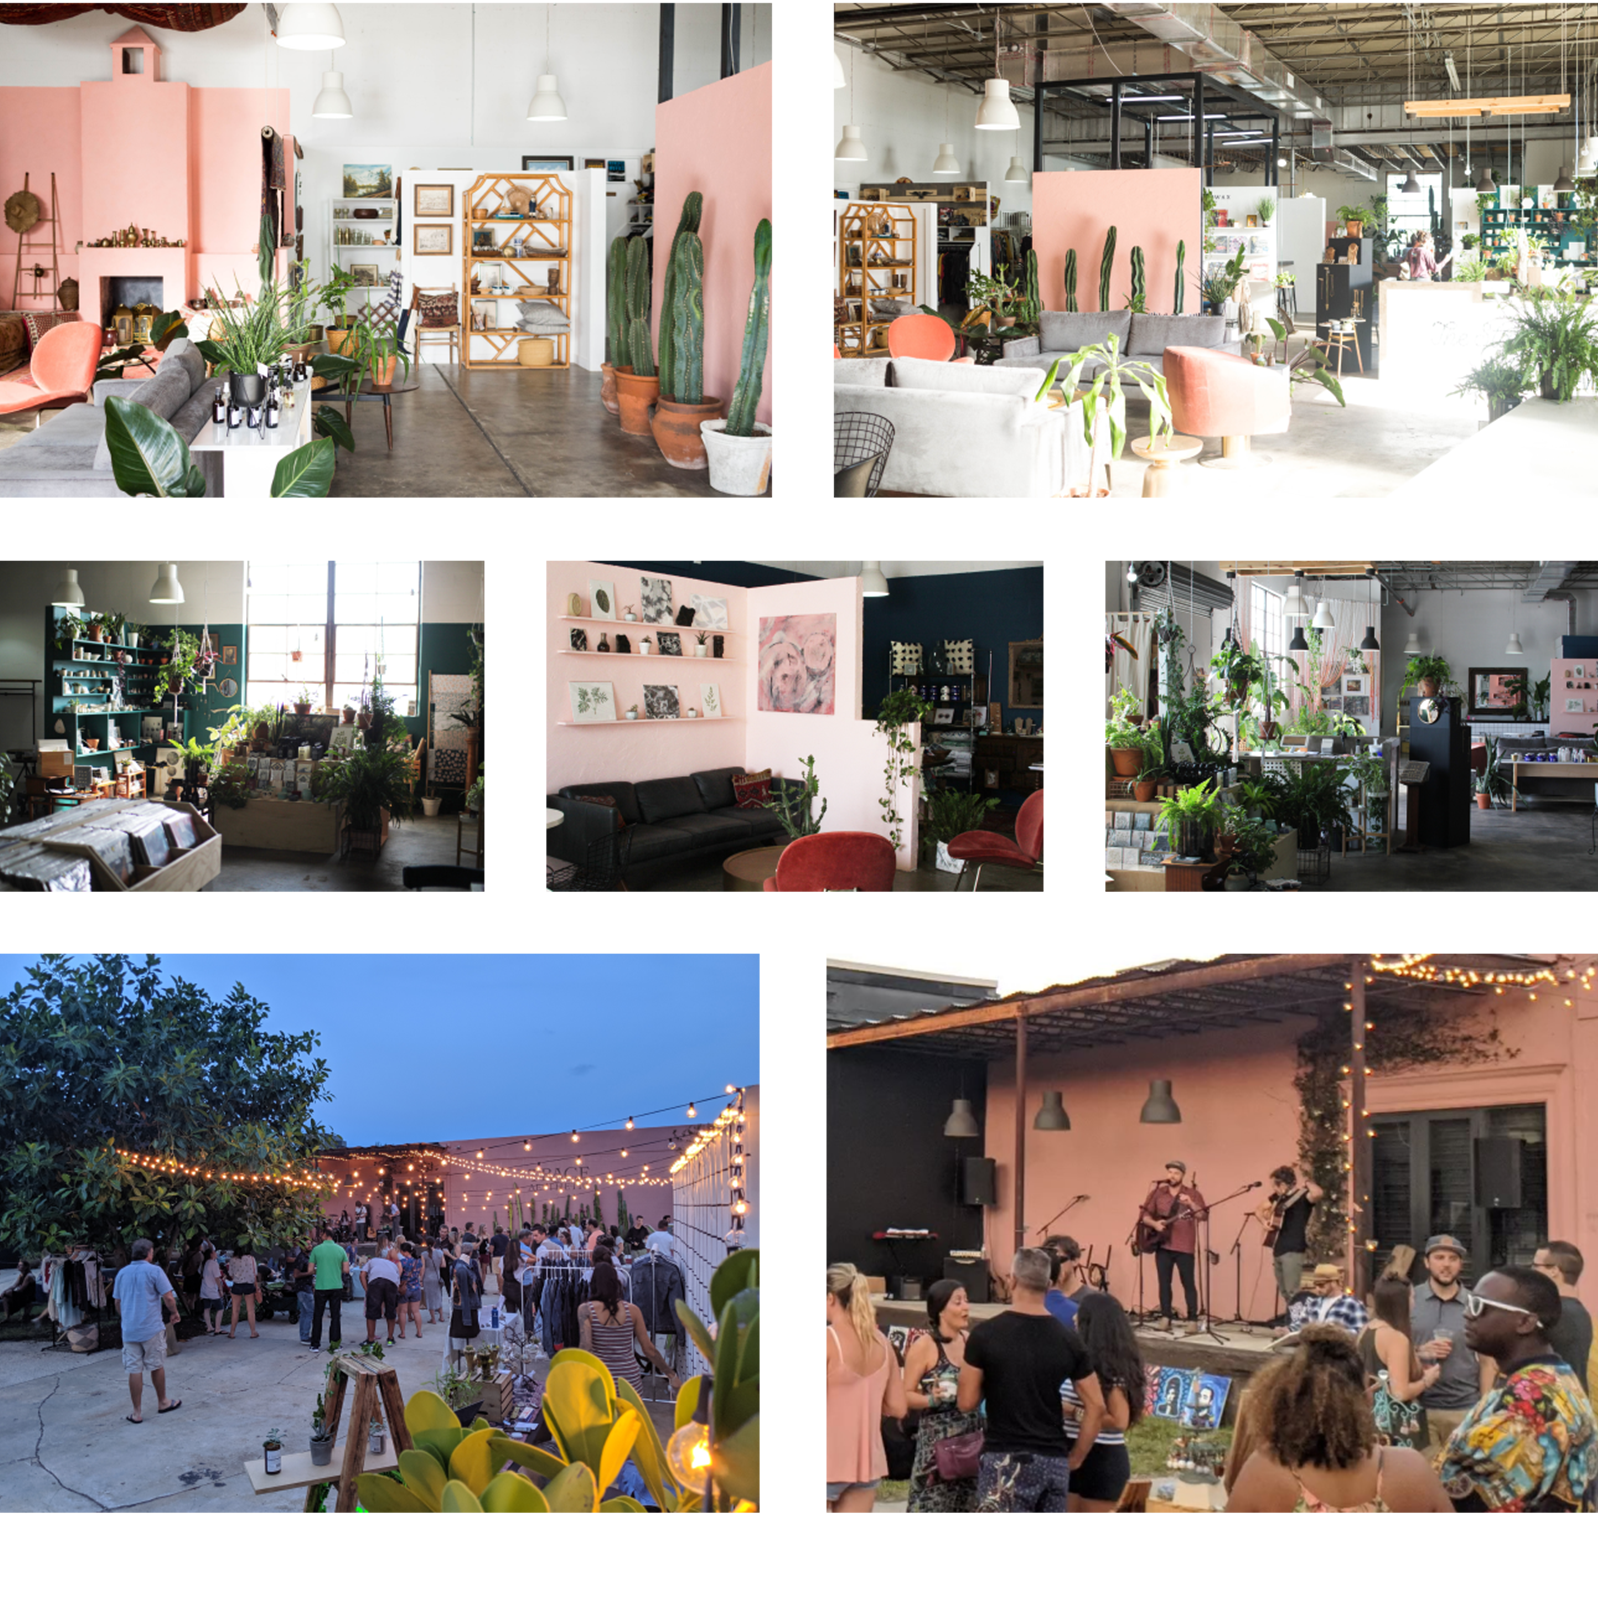 Collage of Elizabeth Ave Station interior retail floor with lush plants, colorful installations, record shop, lounge area and outdoor courtyard area during their music festivals and pop-up events.